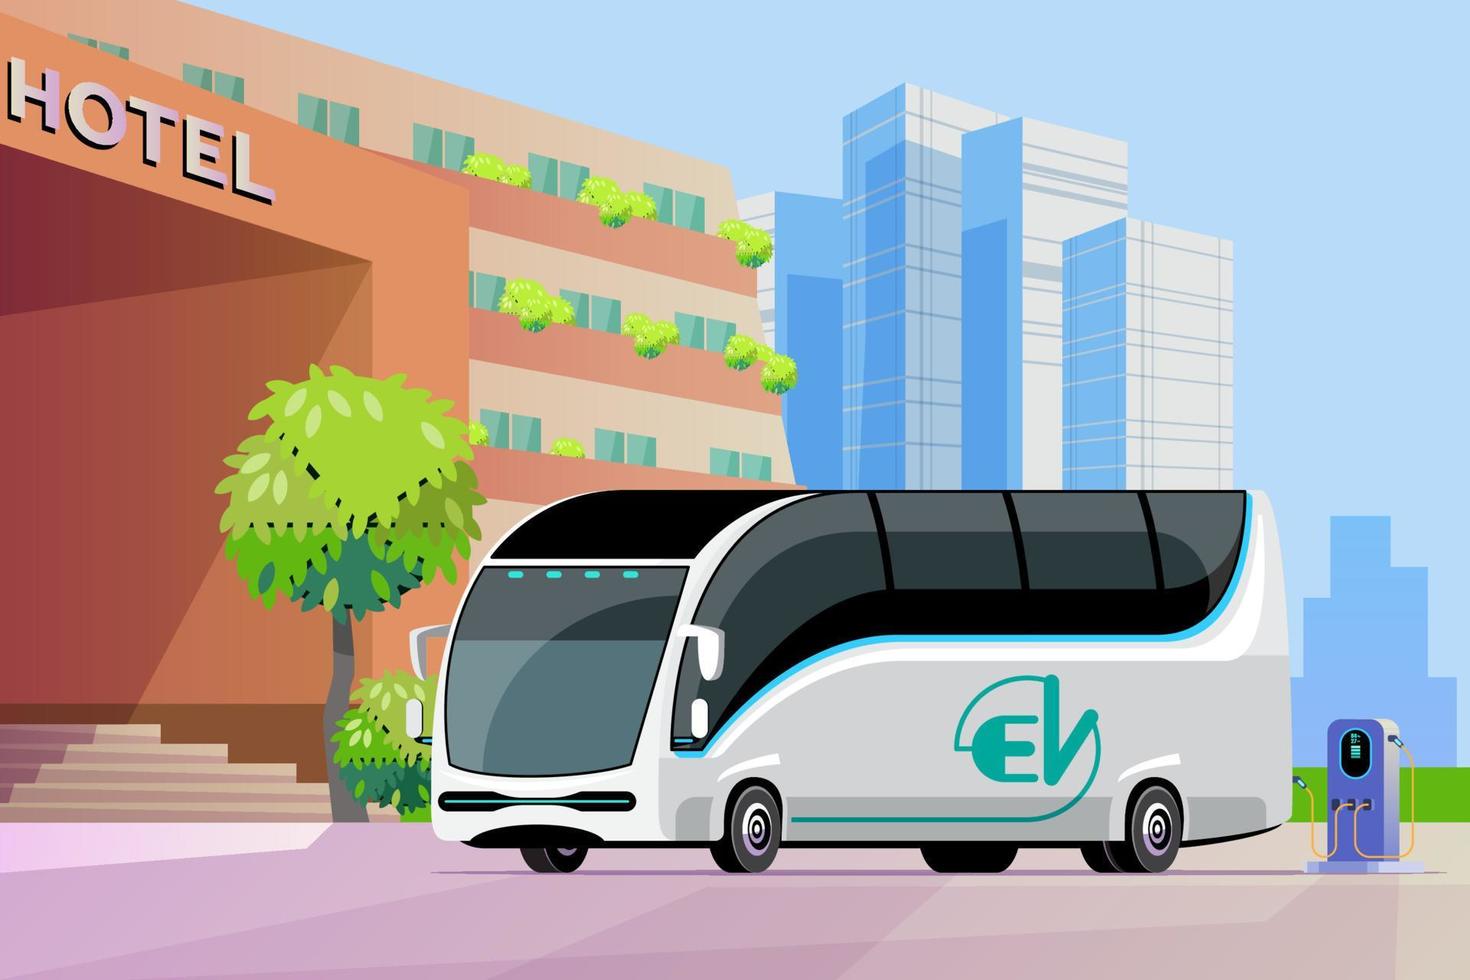 Electric city bus charging hotel parking at the charger station with a plug in cable. Electric buses boost tourism business with clean energy. vector illustration